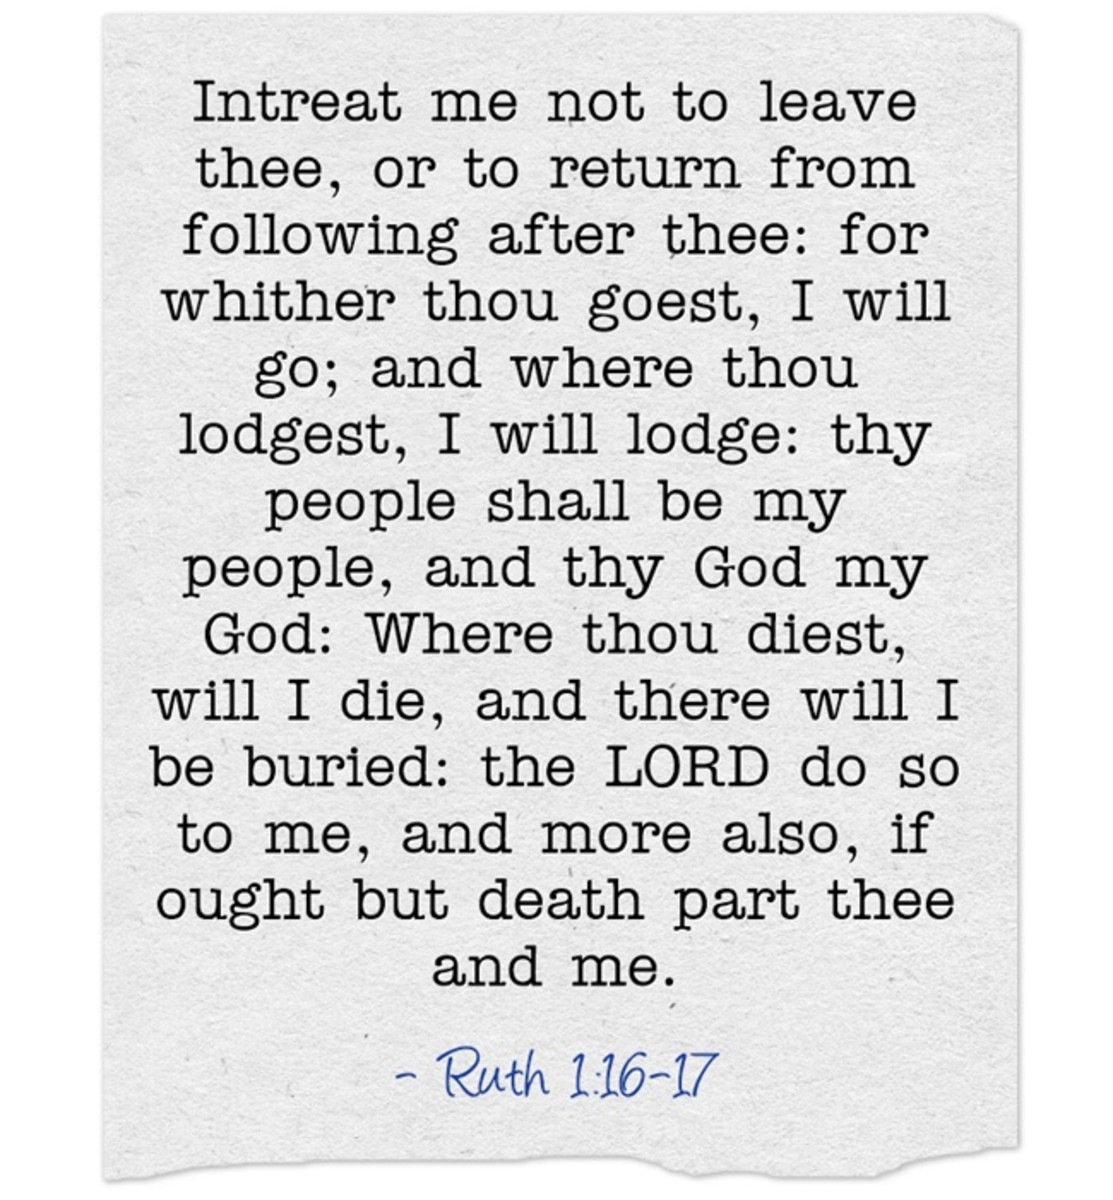 lord-give-me-the-spirit-of-ruth